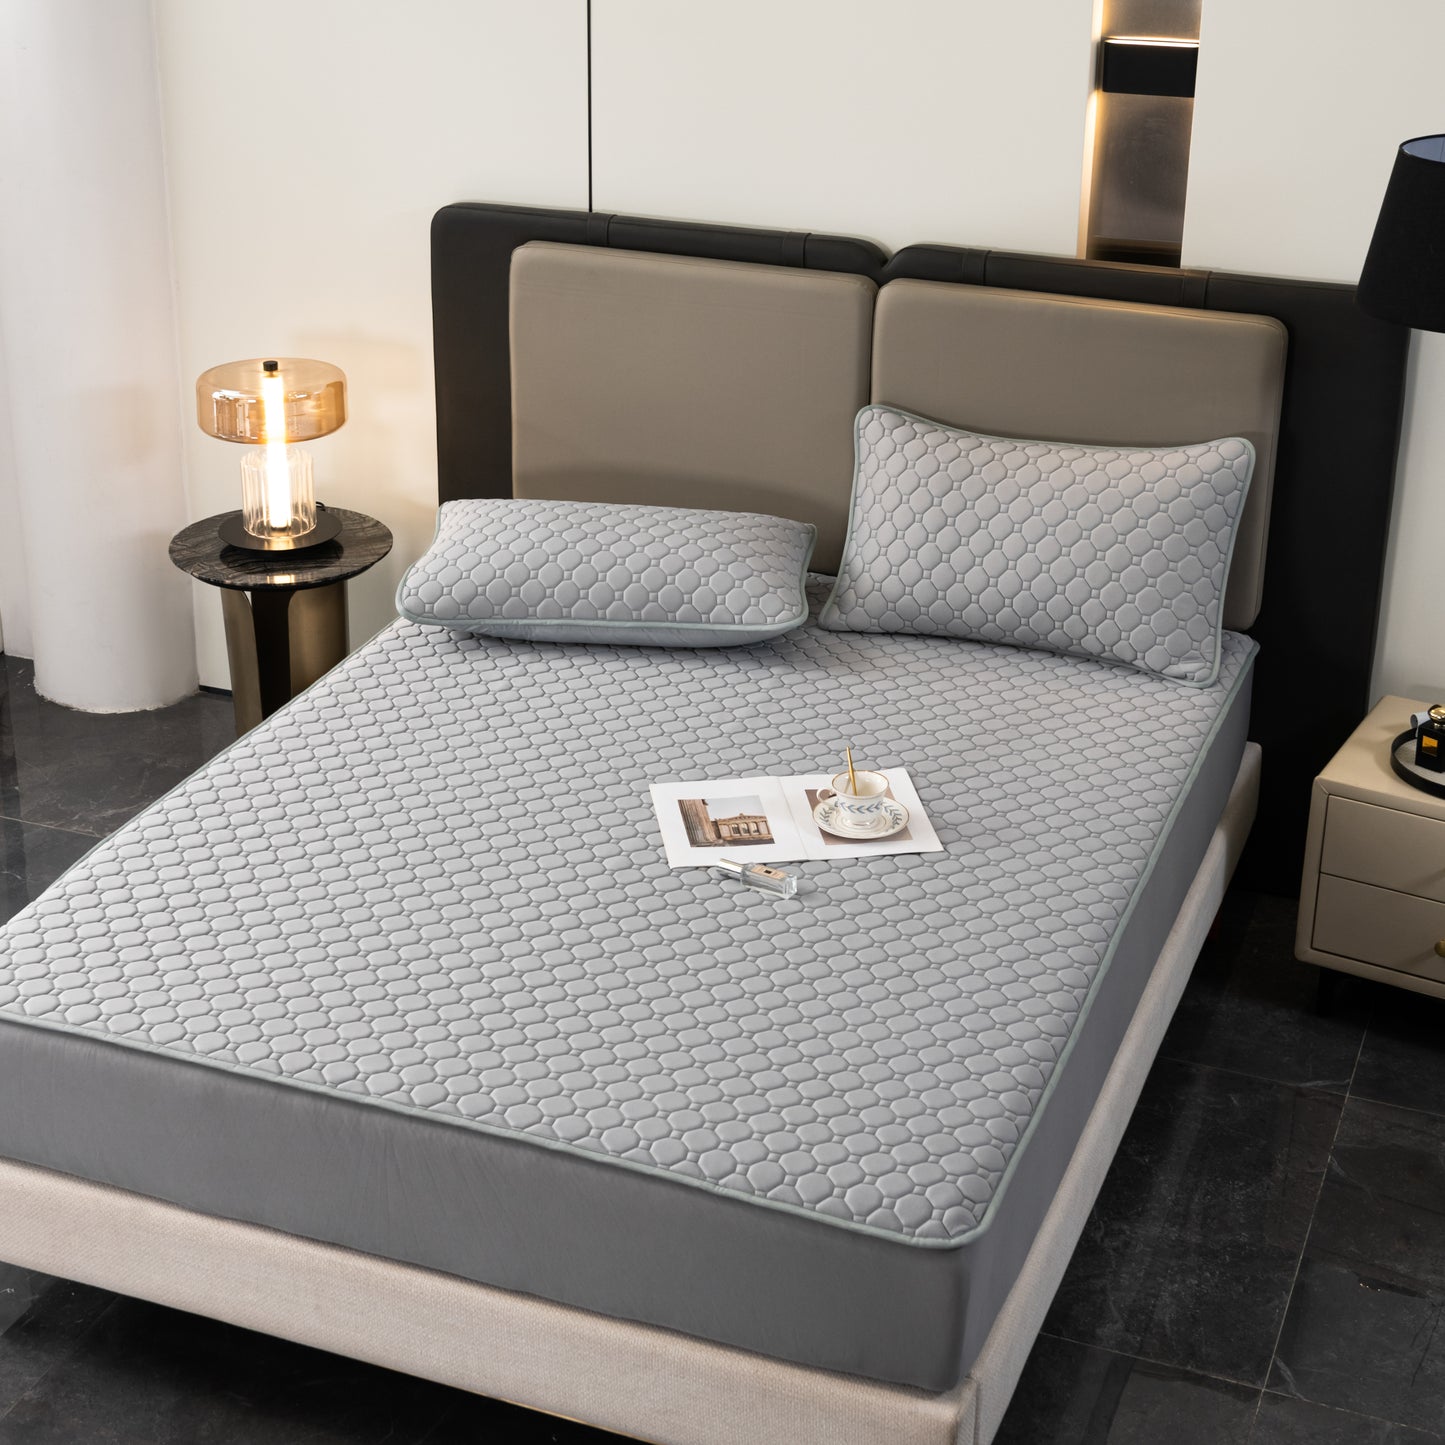 A new generation of cold master, cold silicone mat series， Waterproof Quilted Deep Pocket Mattress Cover - Soft Comfort, Easy Care, Bedroom and Guest Room Essential.